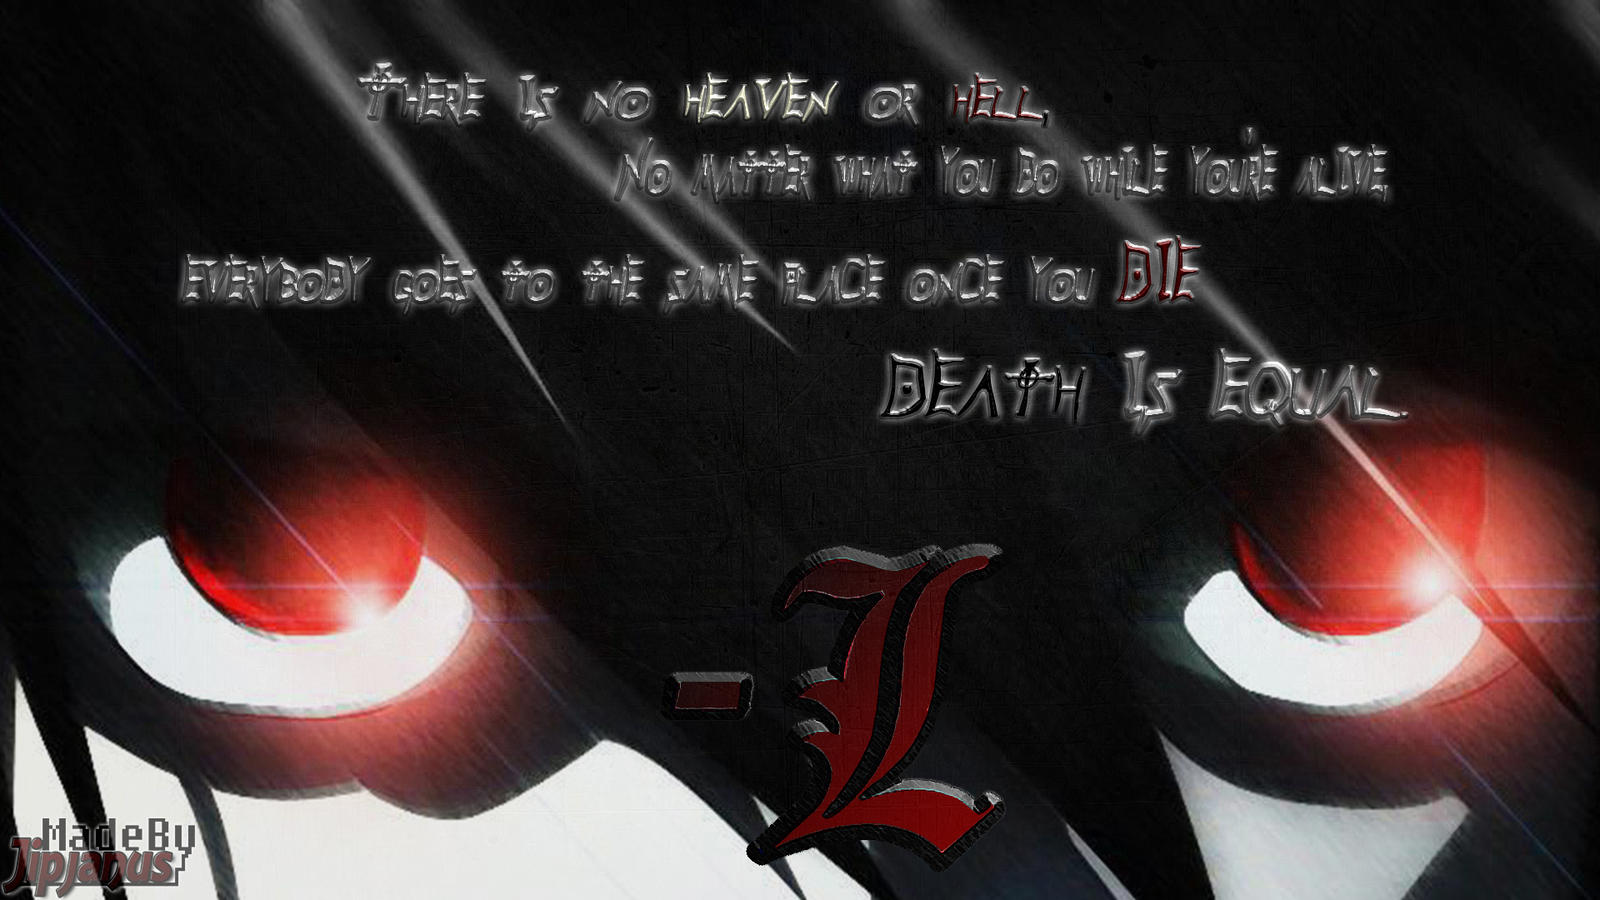 DEATH NOTE L. QUOTE - DEATH IS EQUAL! by Jipjanus on DeviantArt